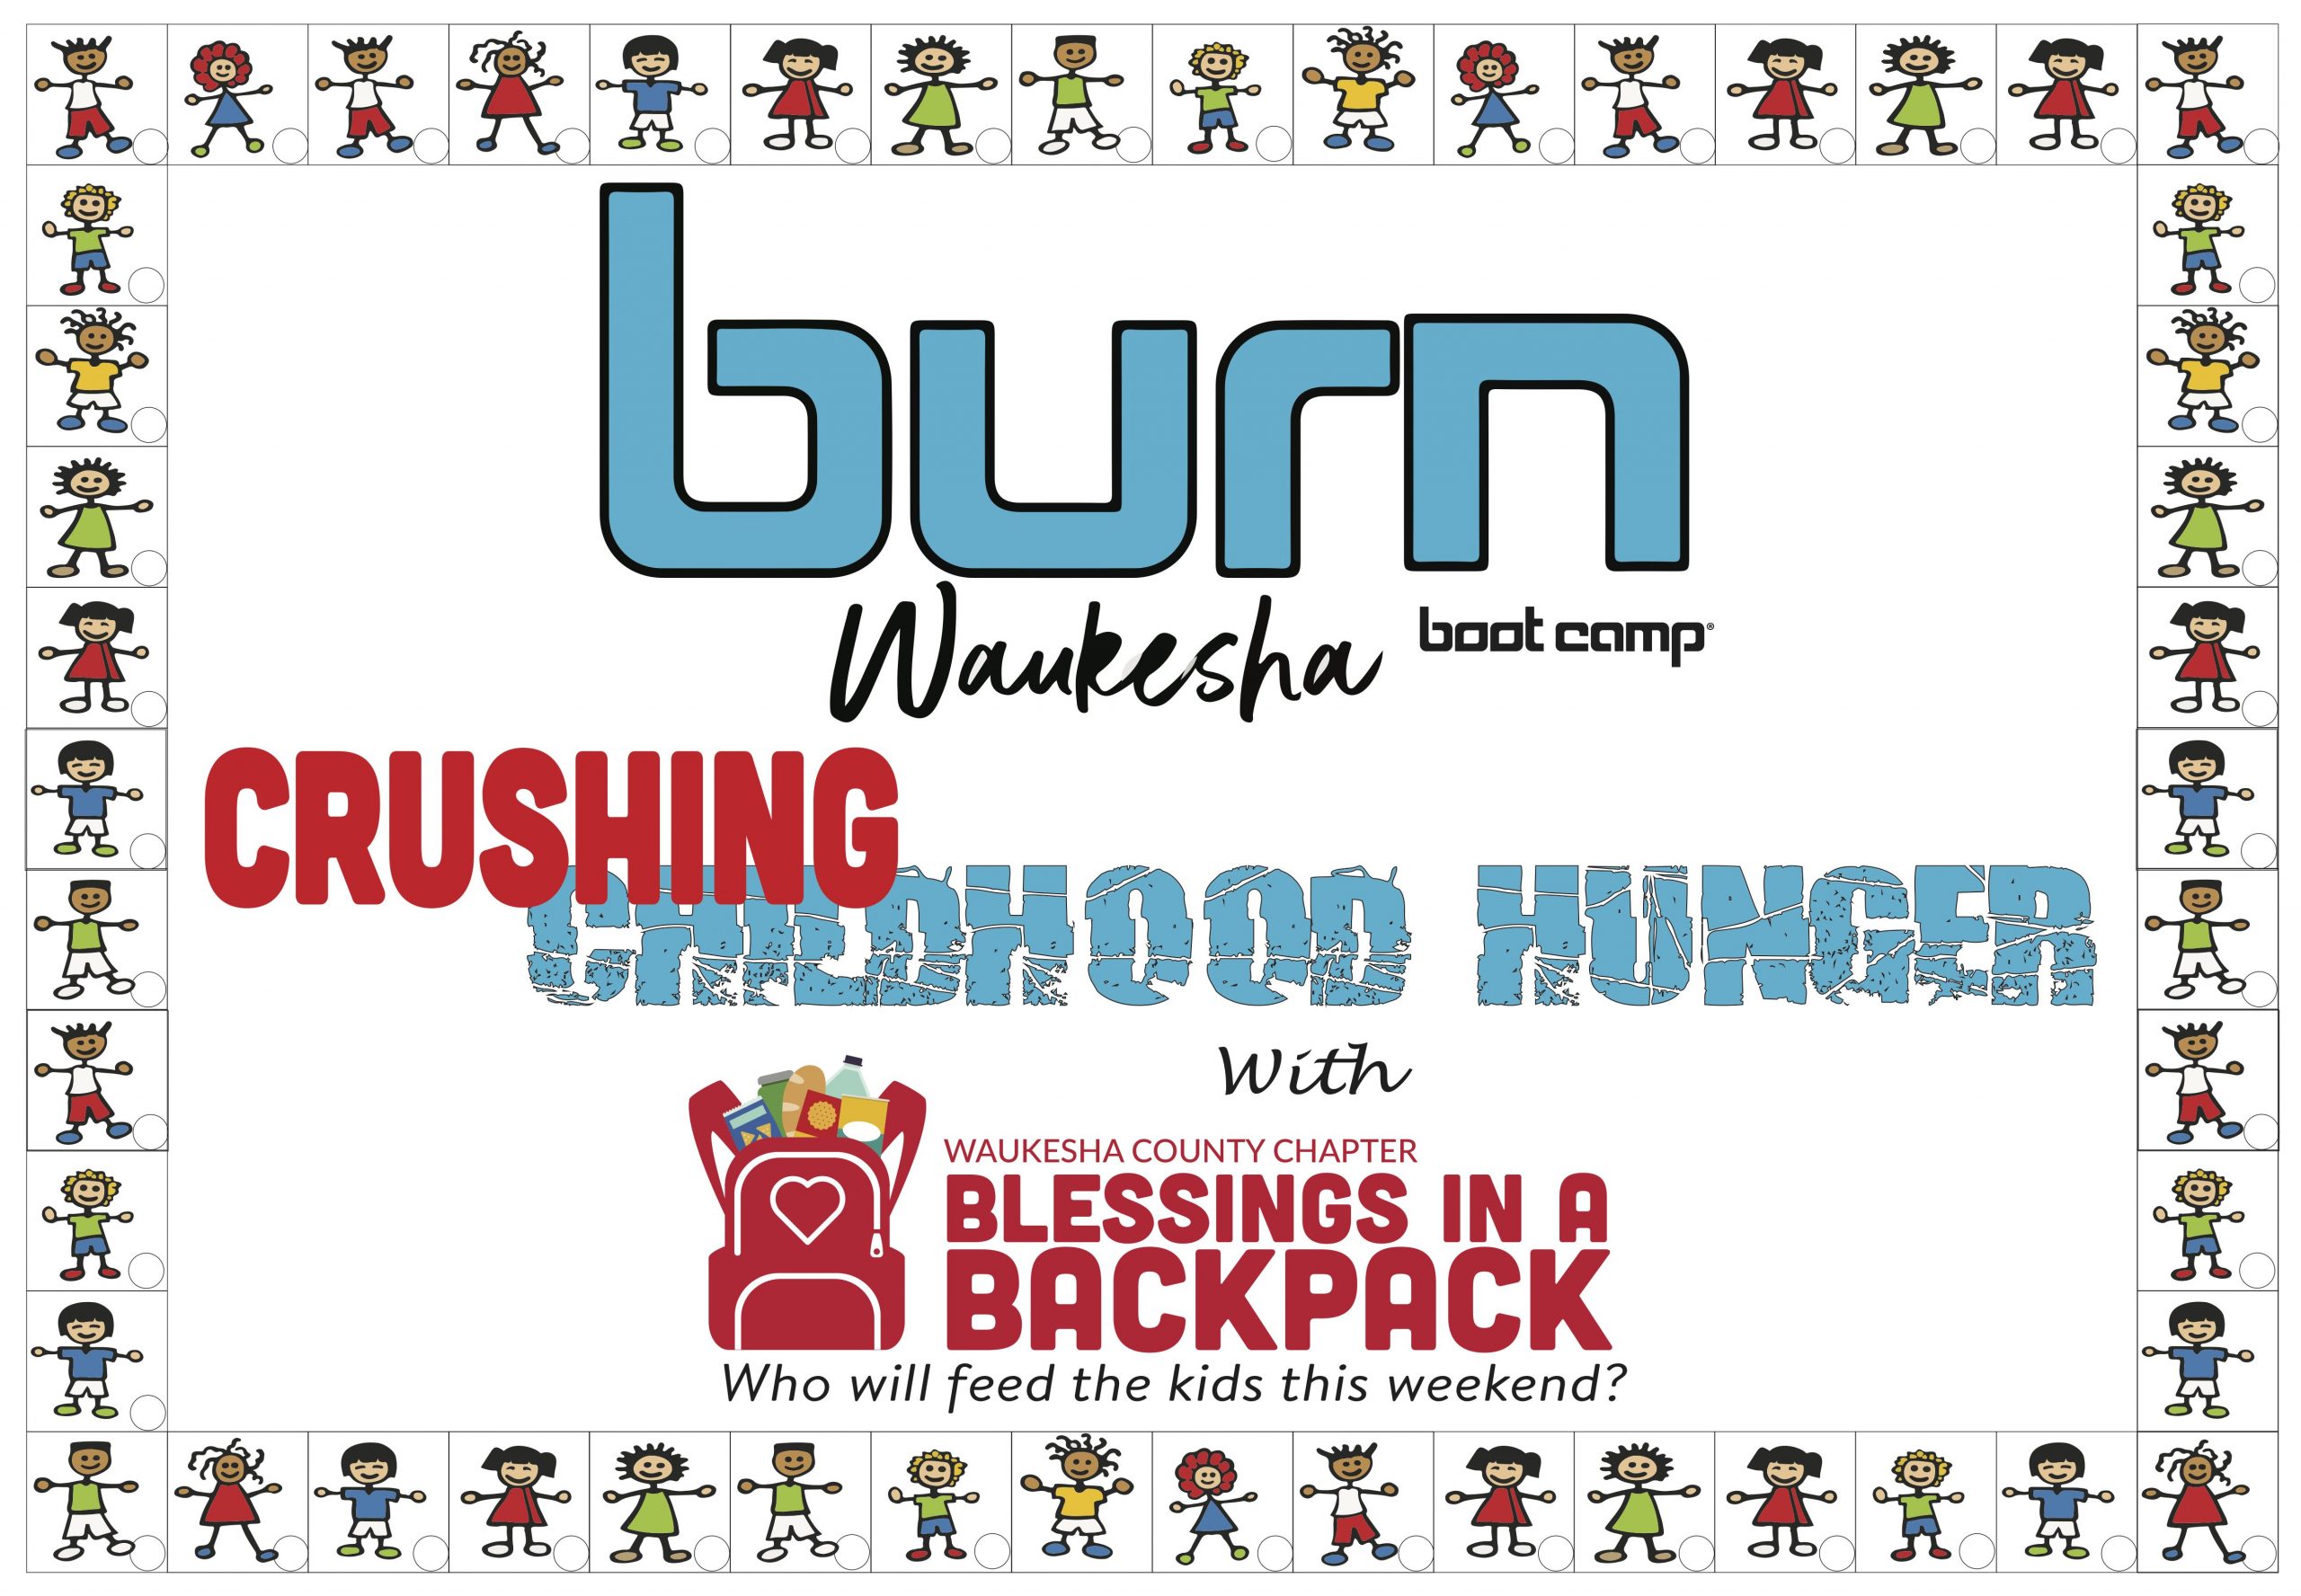 Burn Bootcamp of Waukesha’s 50 Kid Challenge…join their Yoga class to help them sponsor weekend meals for 50 local kids this year!